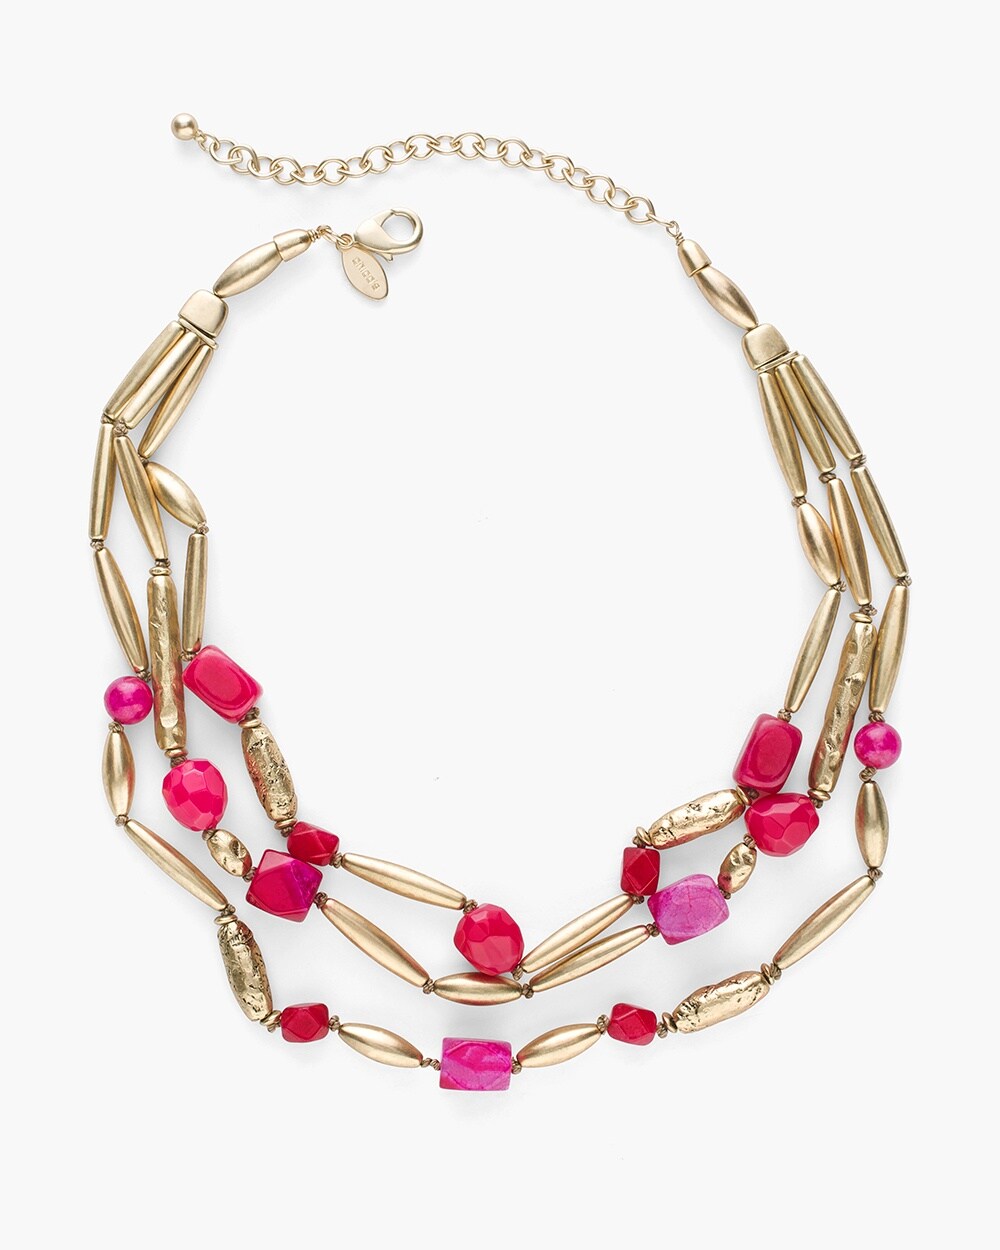 Short Gold-Tone and Pink Multi-Strand Necklace